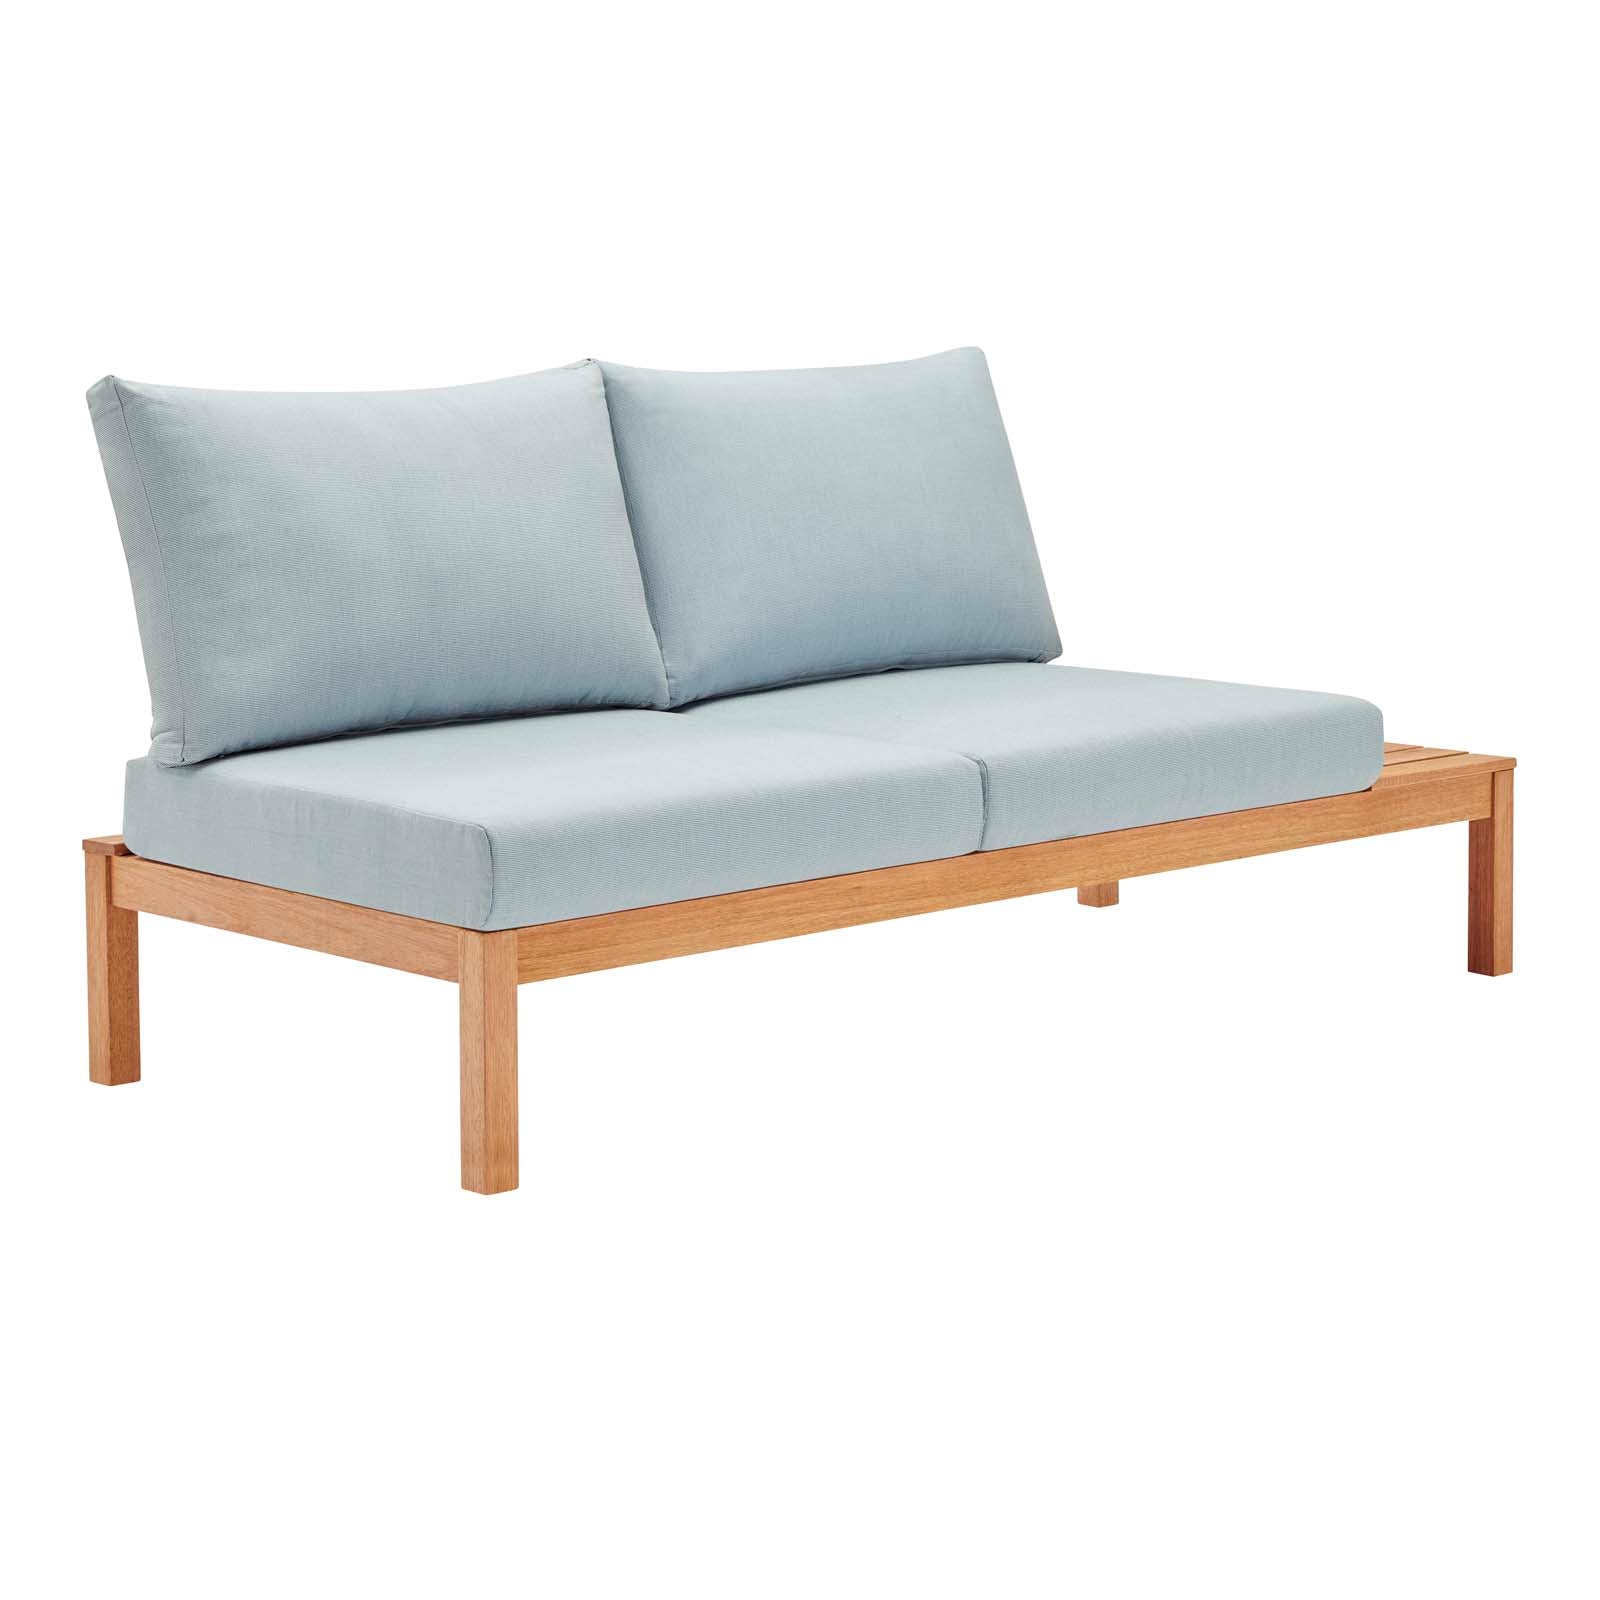 Freeport Karri Wood Outdoor Patio Loveseat with Left-Facing Side End Table - East Shore Modern Home Furnishings